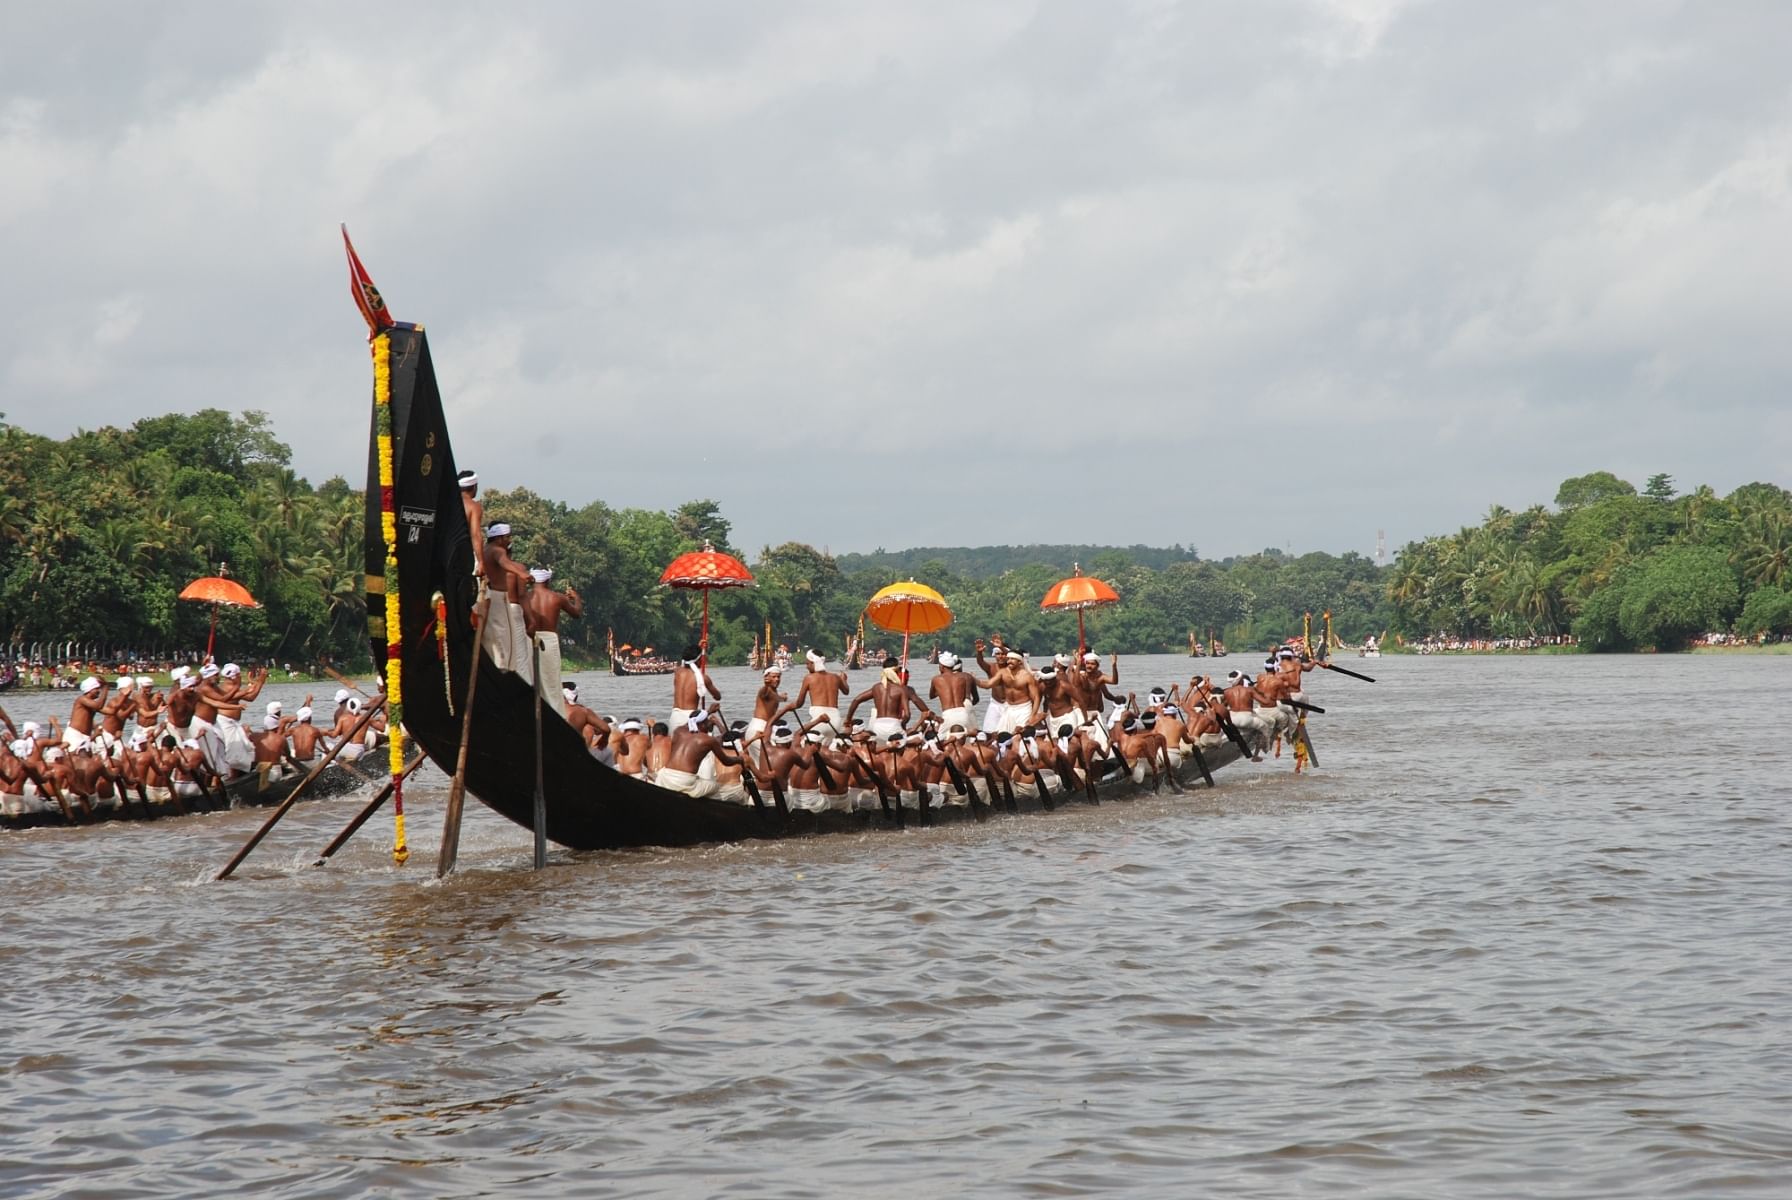 The snake boat race of Kerala is getting a major fillip as many leading corporate and celebrities are likely to bid for the maiden edition of Champions Boat League (CBL). (File Photo)